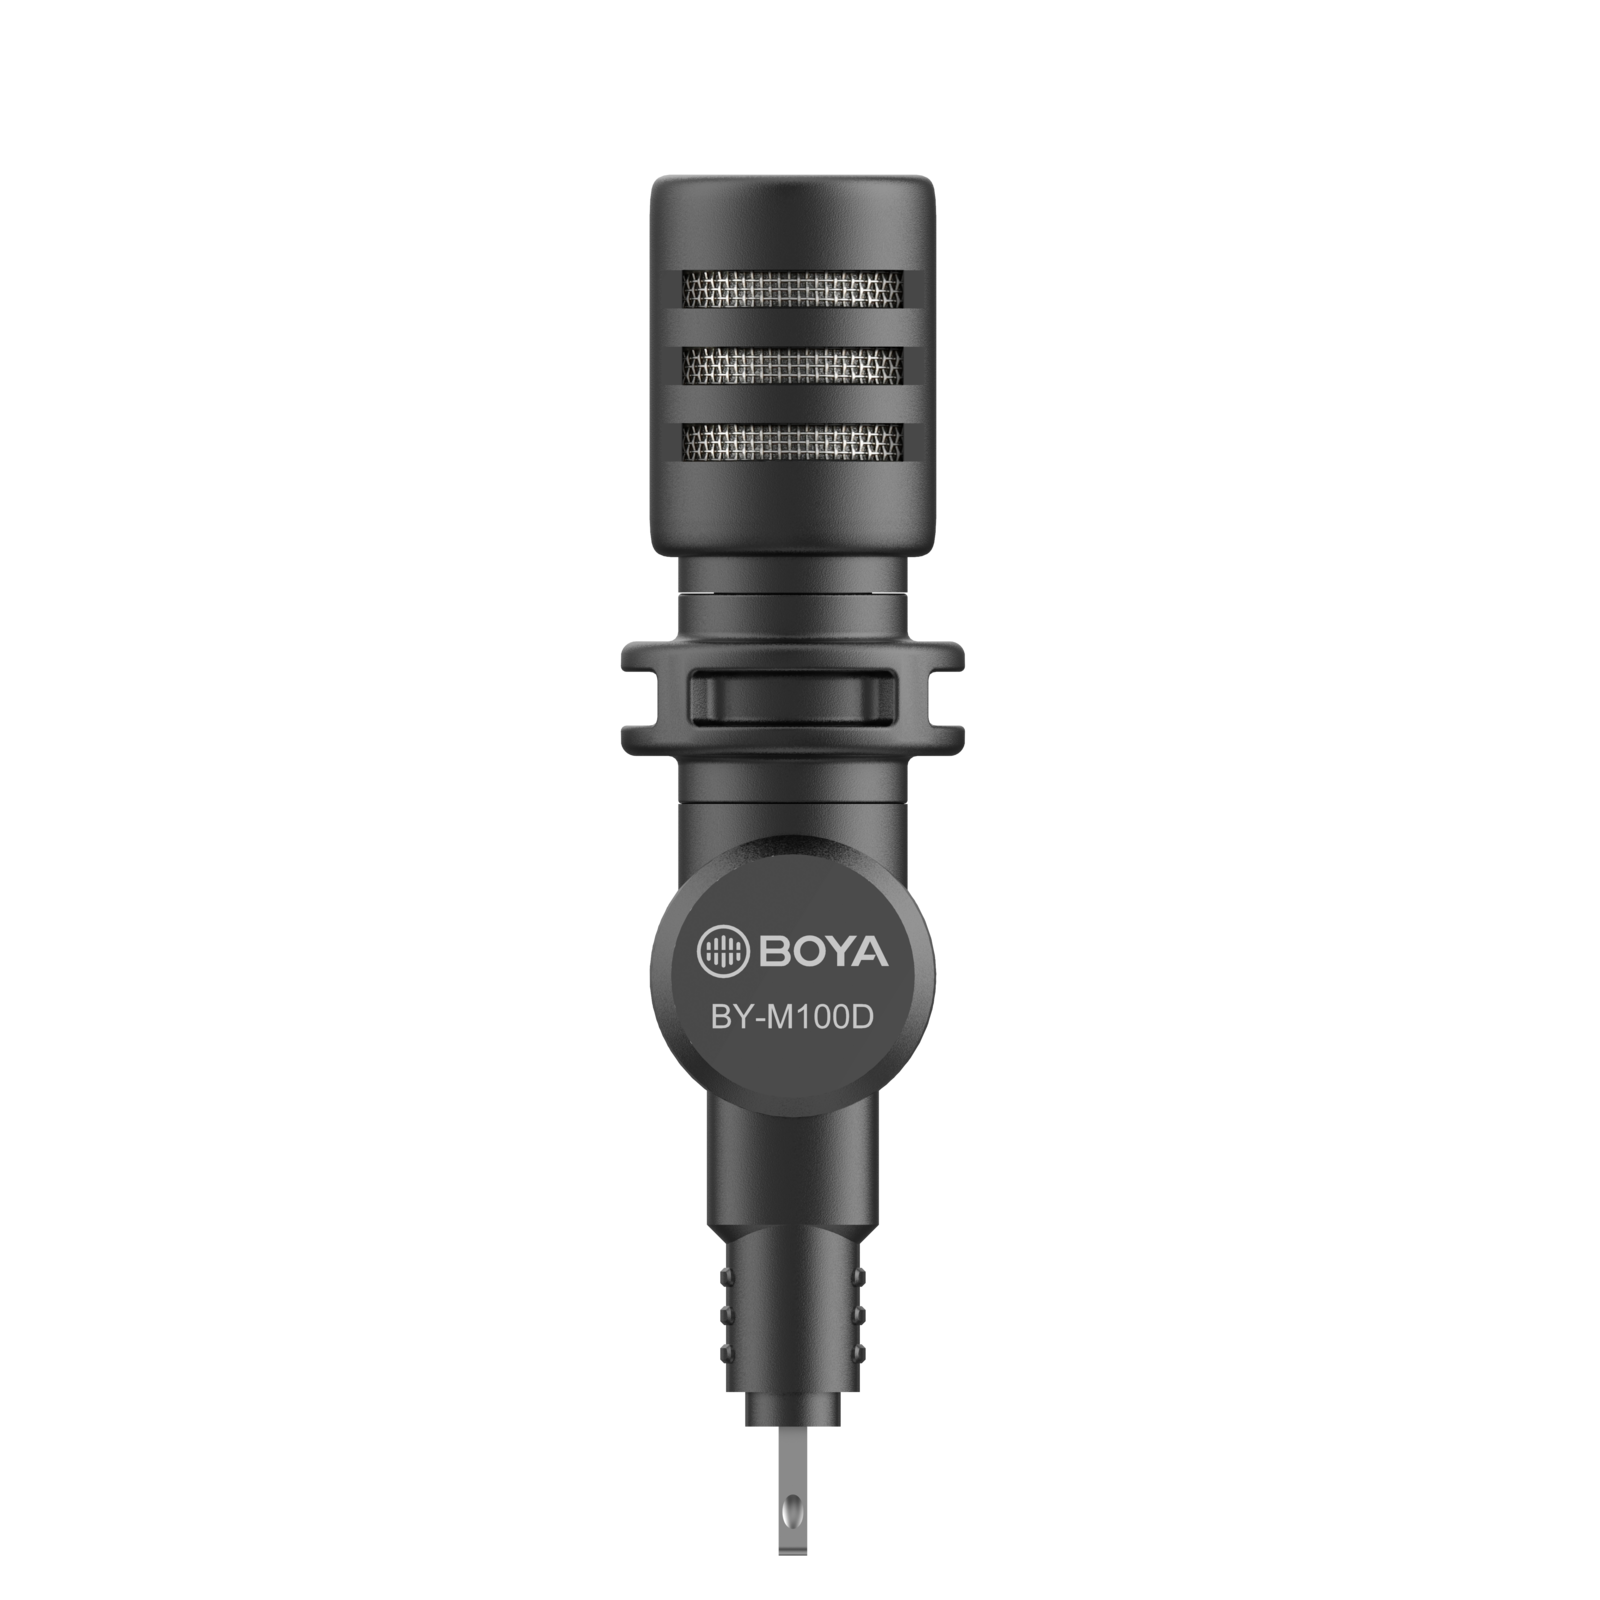 BOYA BY-M100D Plug & Play Microphone (Lightning) for iOS Devices main image